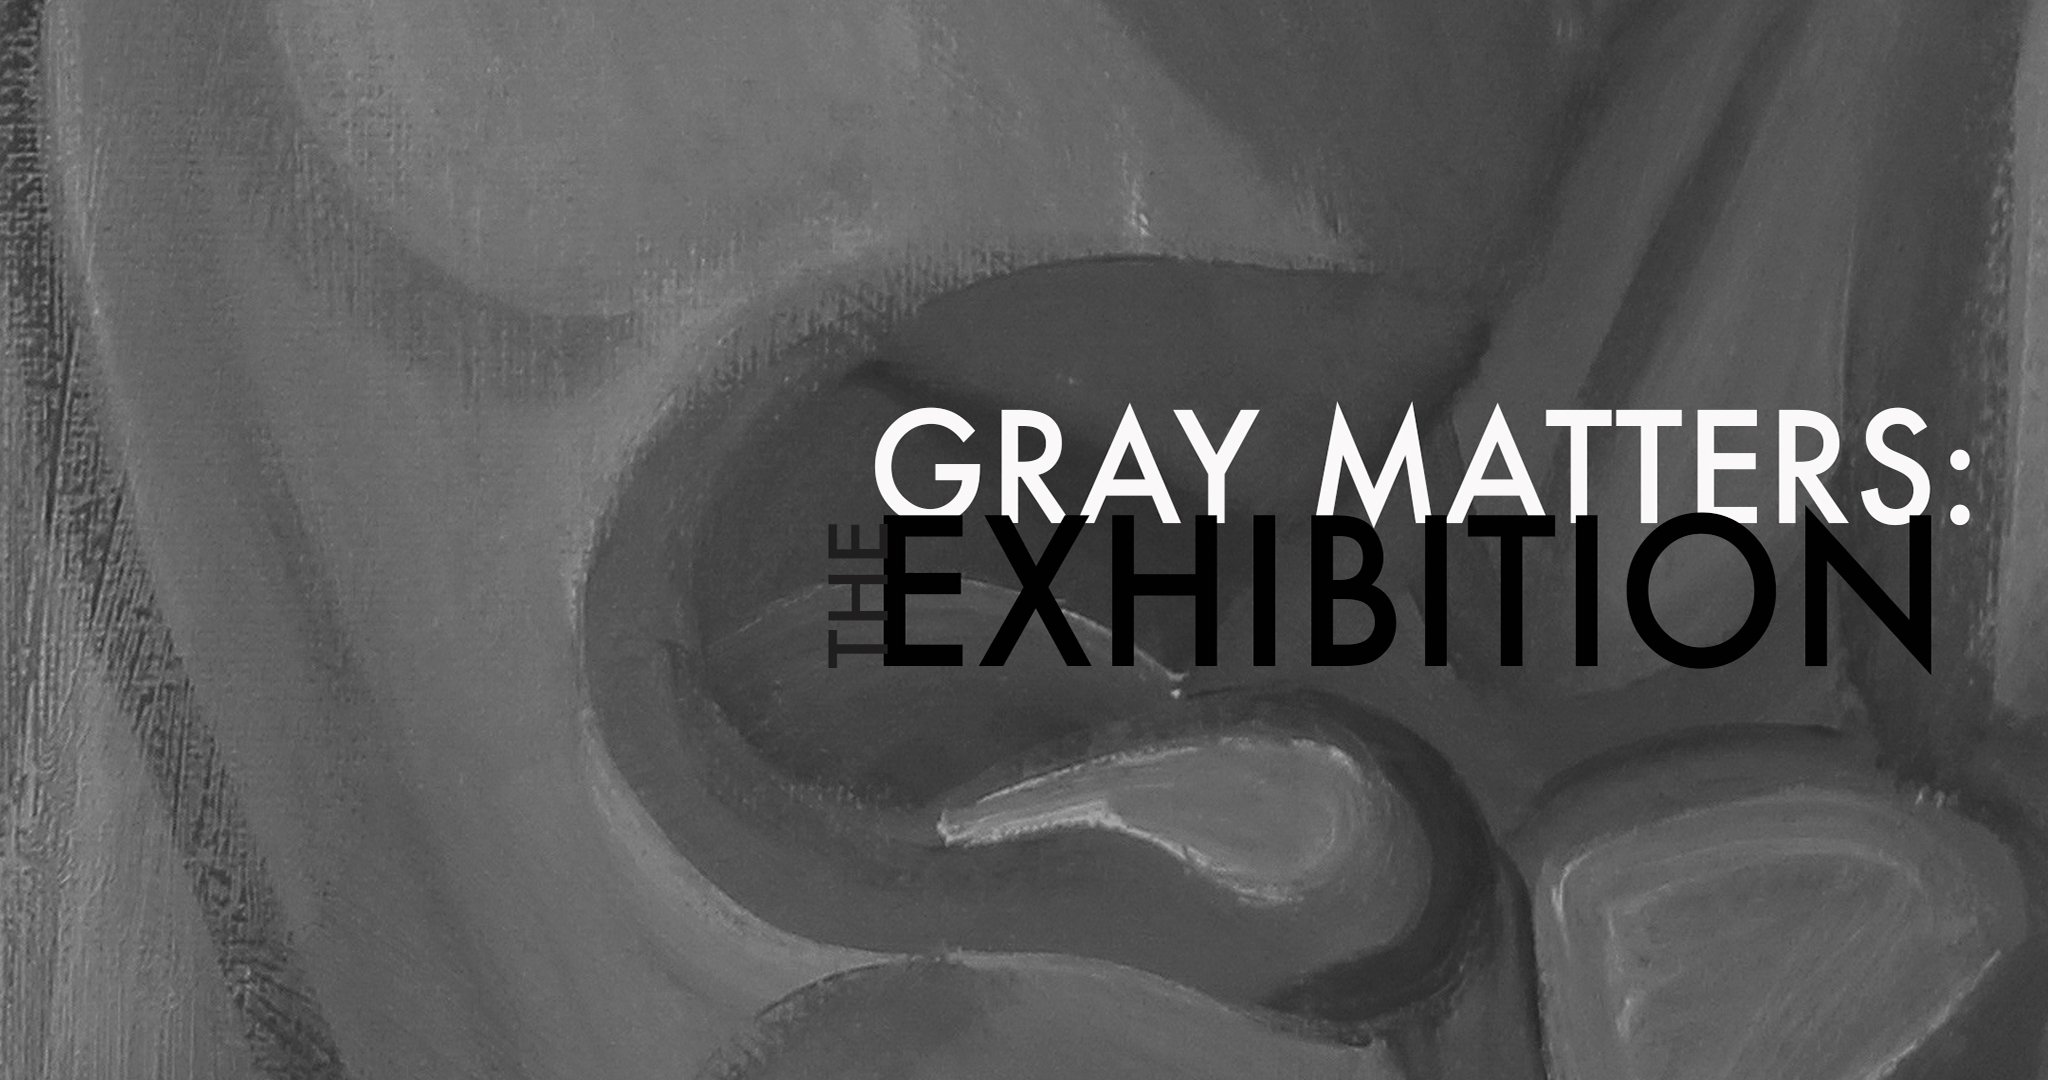 GRAY MATTERS: THE EXHIBITION